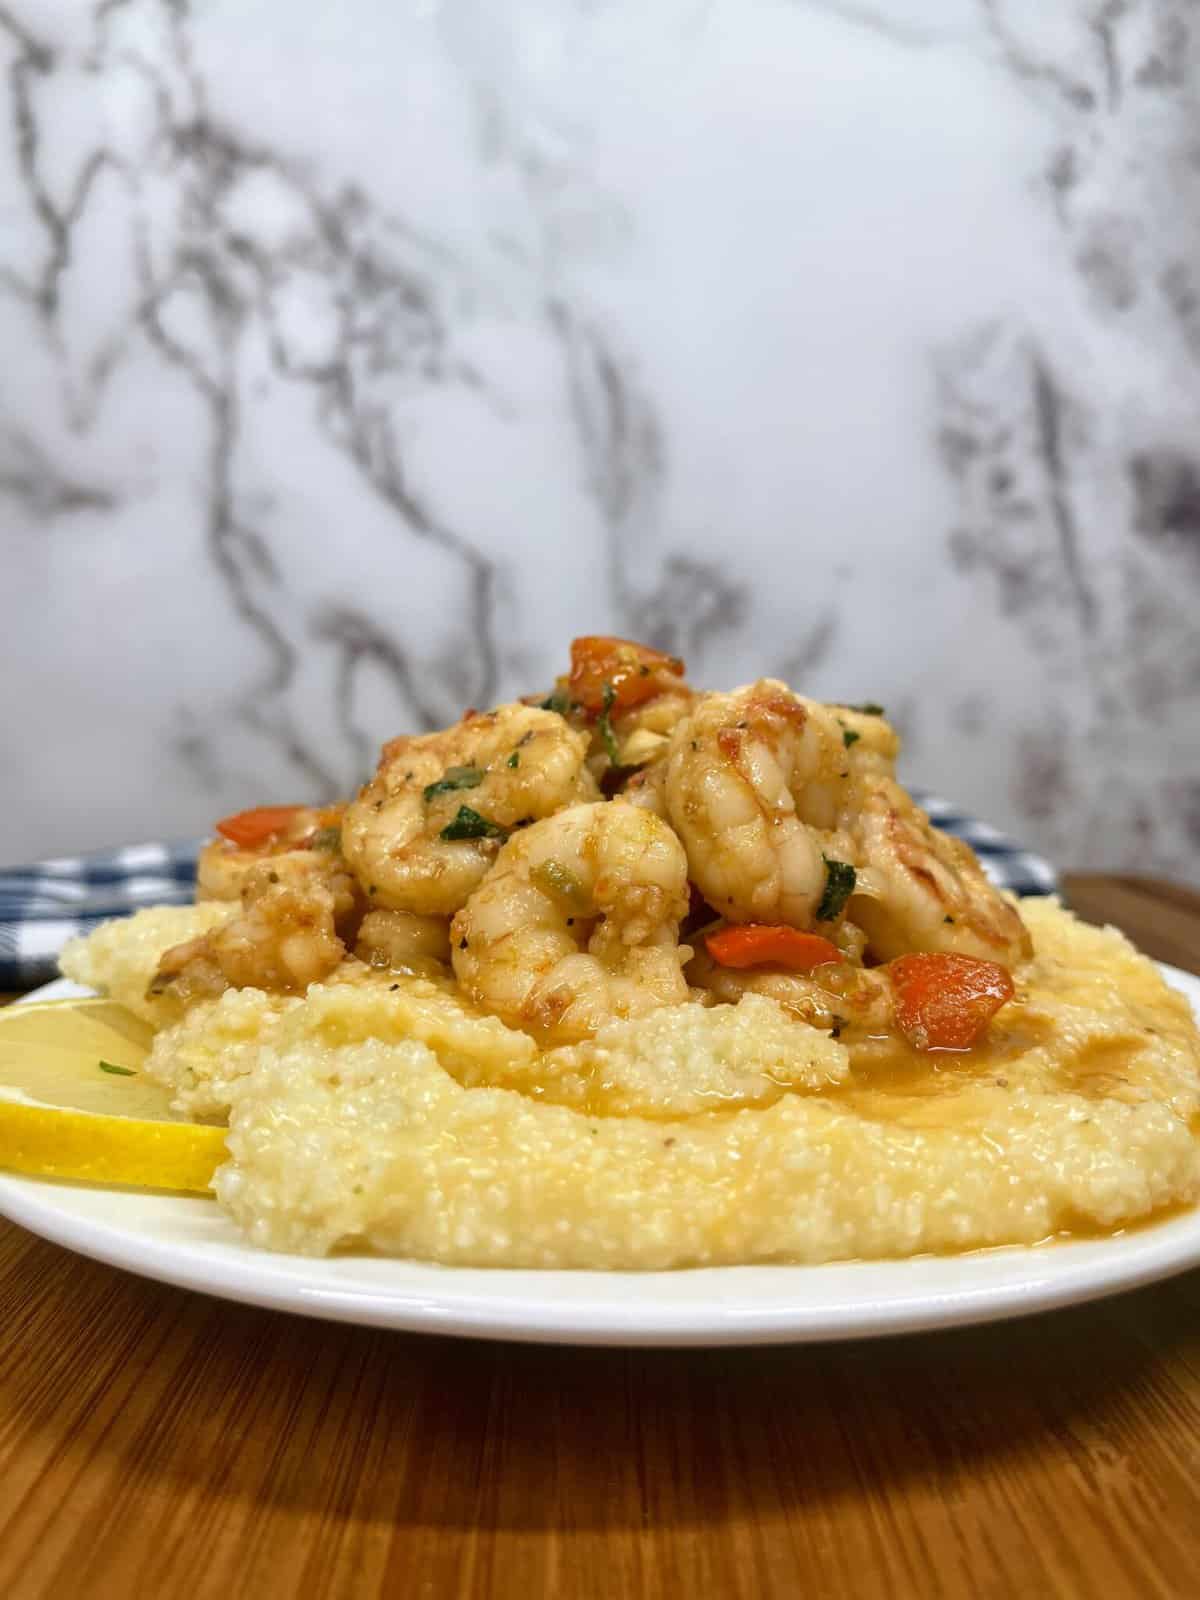 Cooked shrimp and grits on a plate from the side